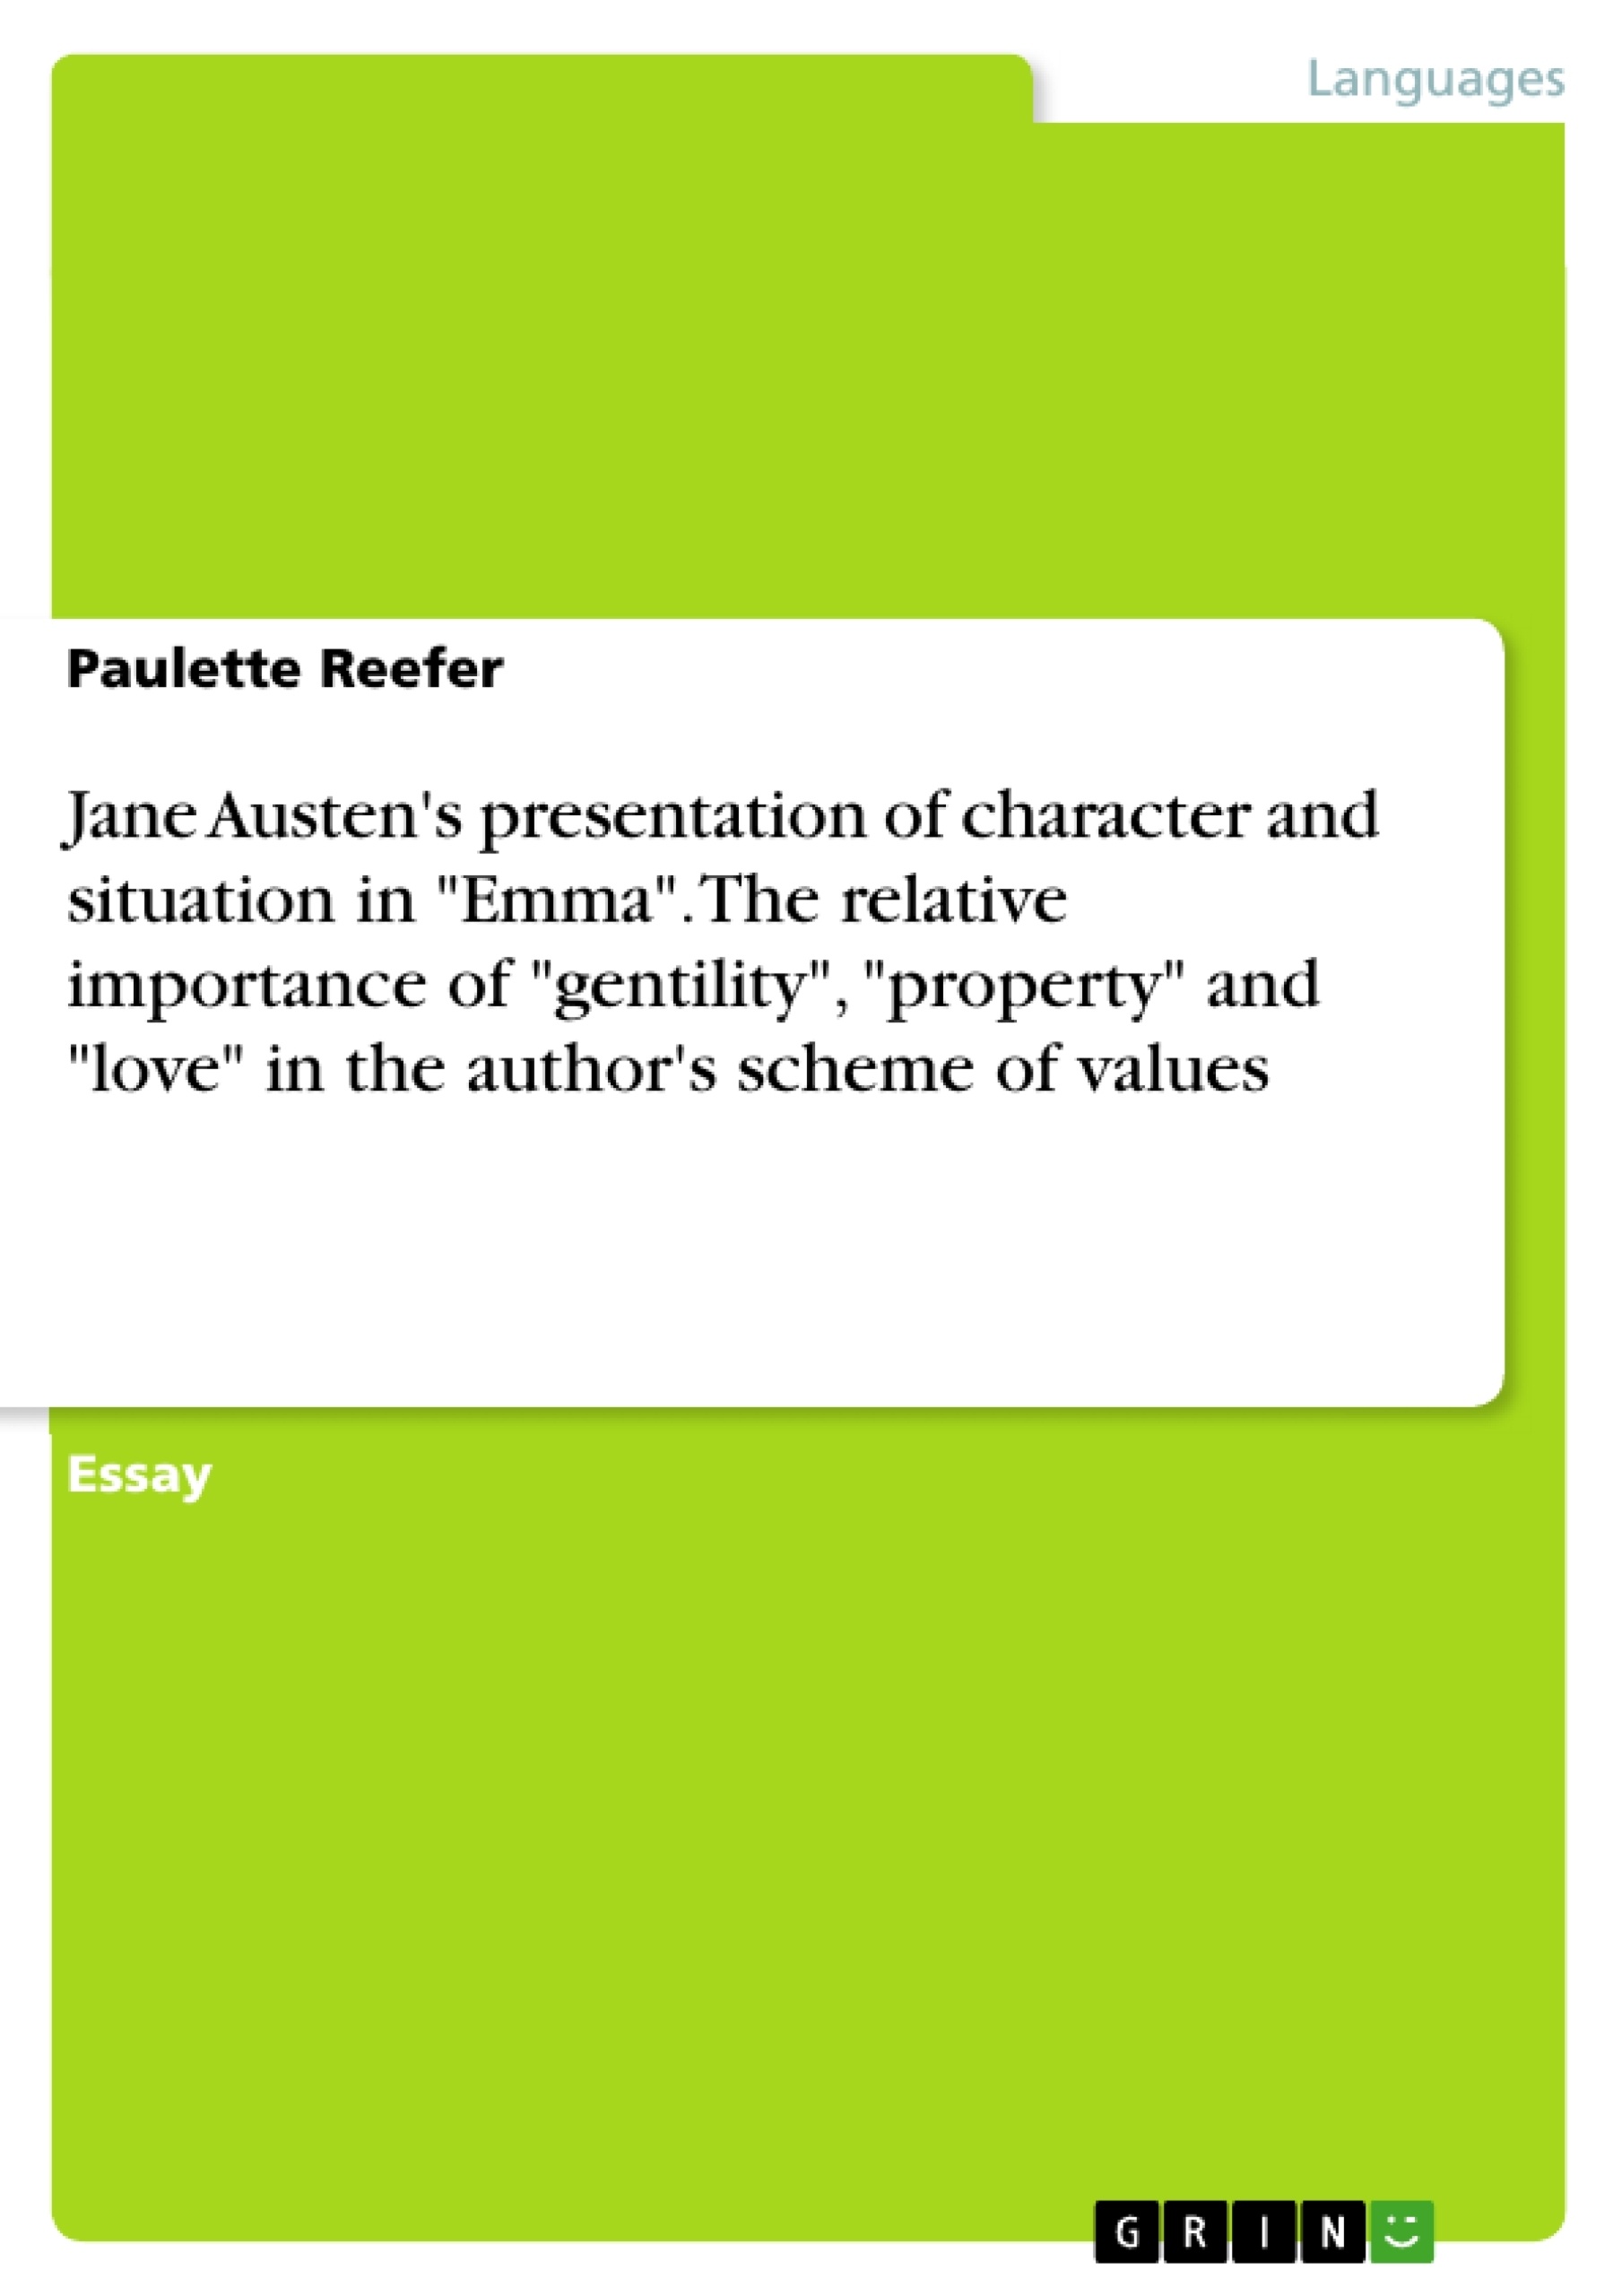 Titre: Jane Austen's presentation of character and situation in "Emma". The relative importance of "gentility", "property" and "love" in the author's scheme of values